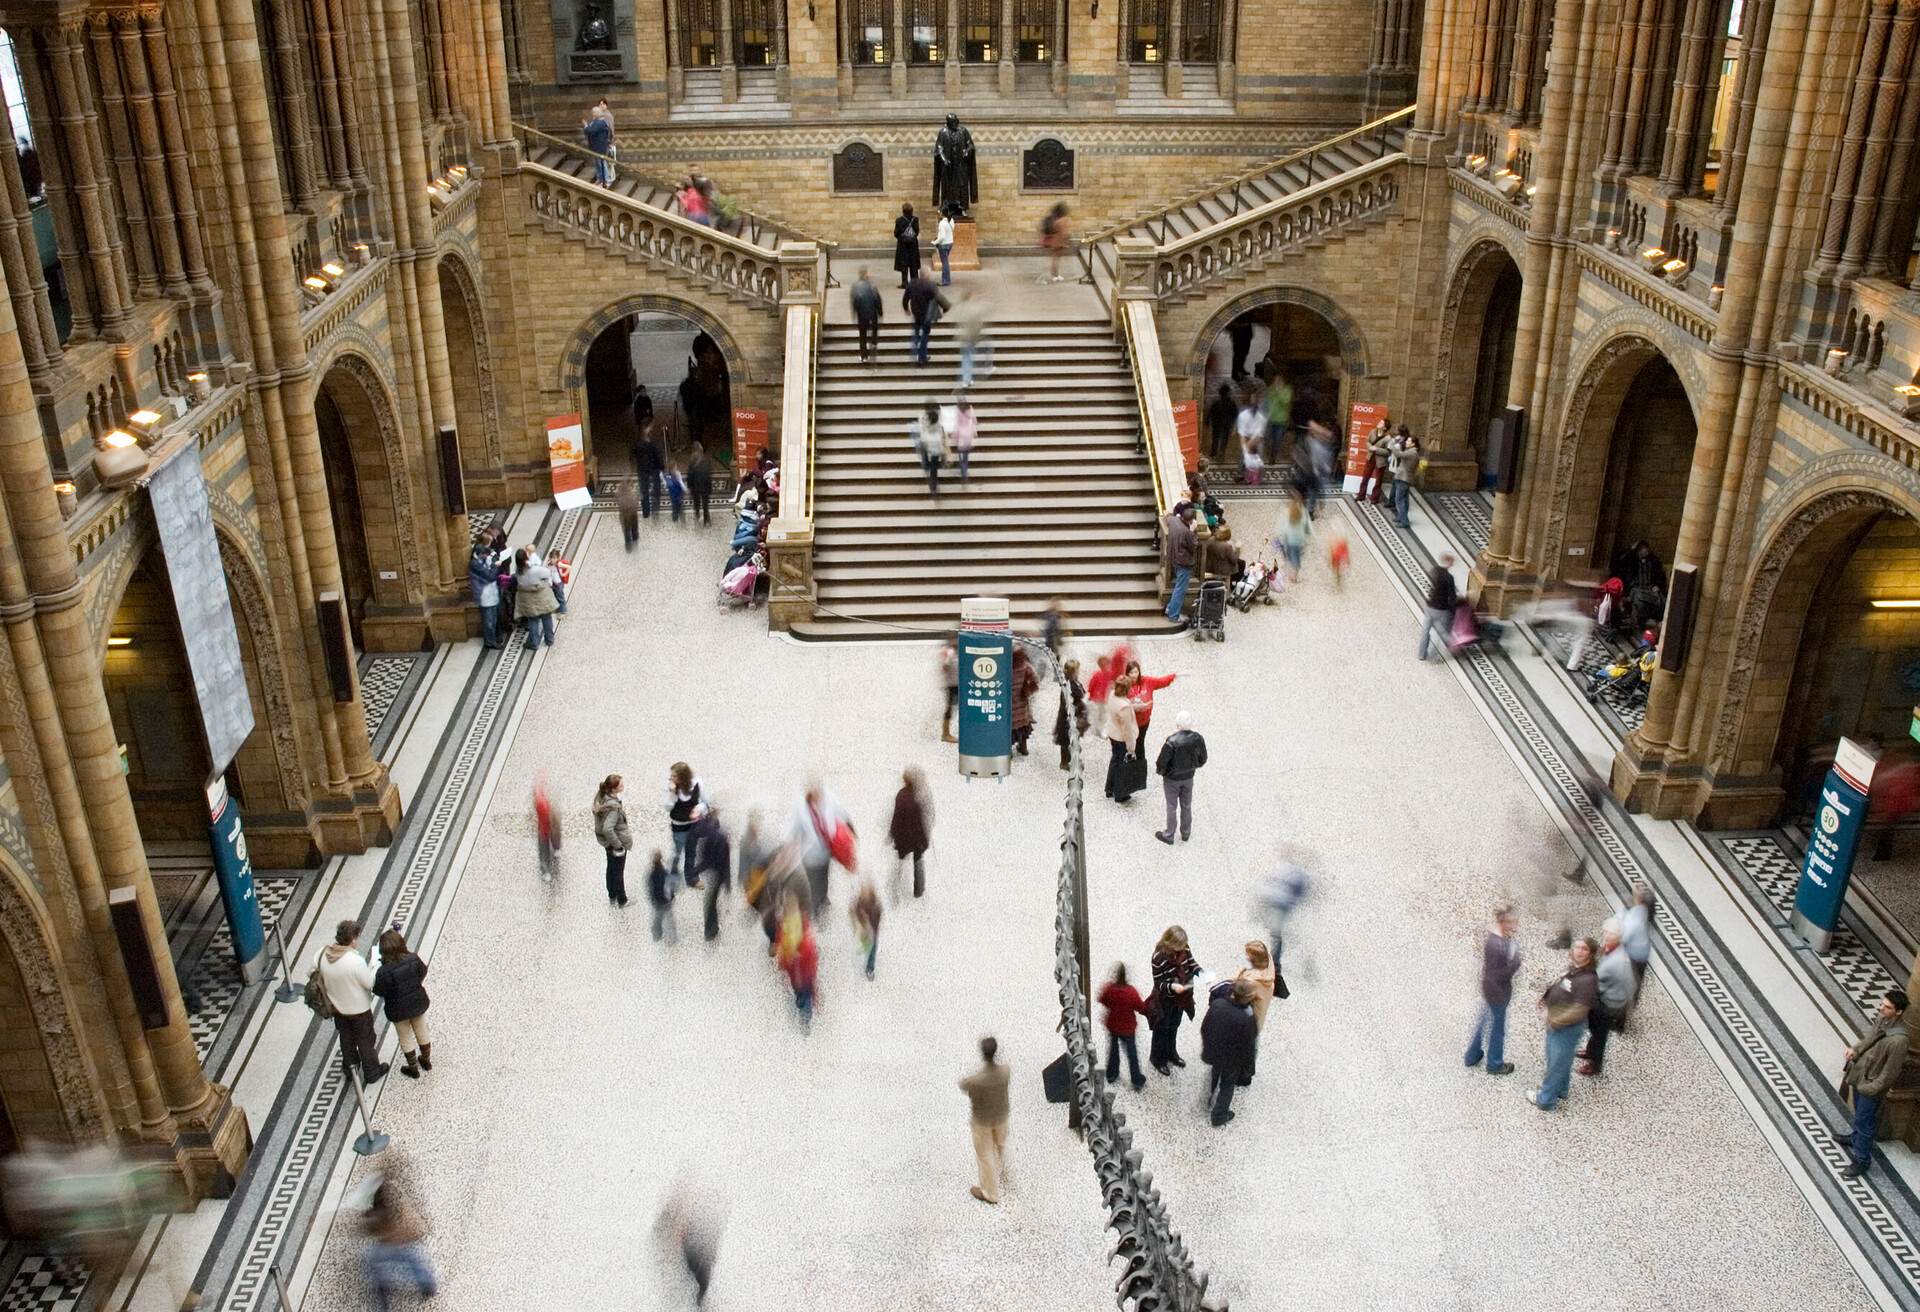 DEST_ENGLAND_LONDON_NATURAL_HISTORY_MUSEUM_GettyImages-183270987.jpg